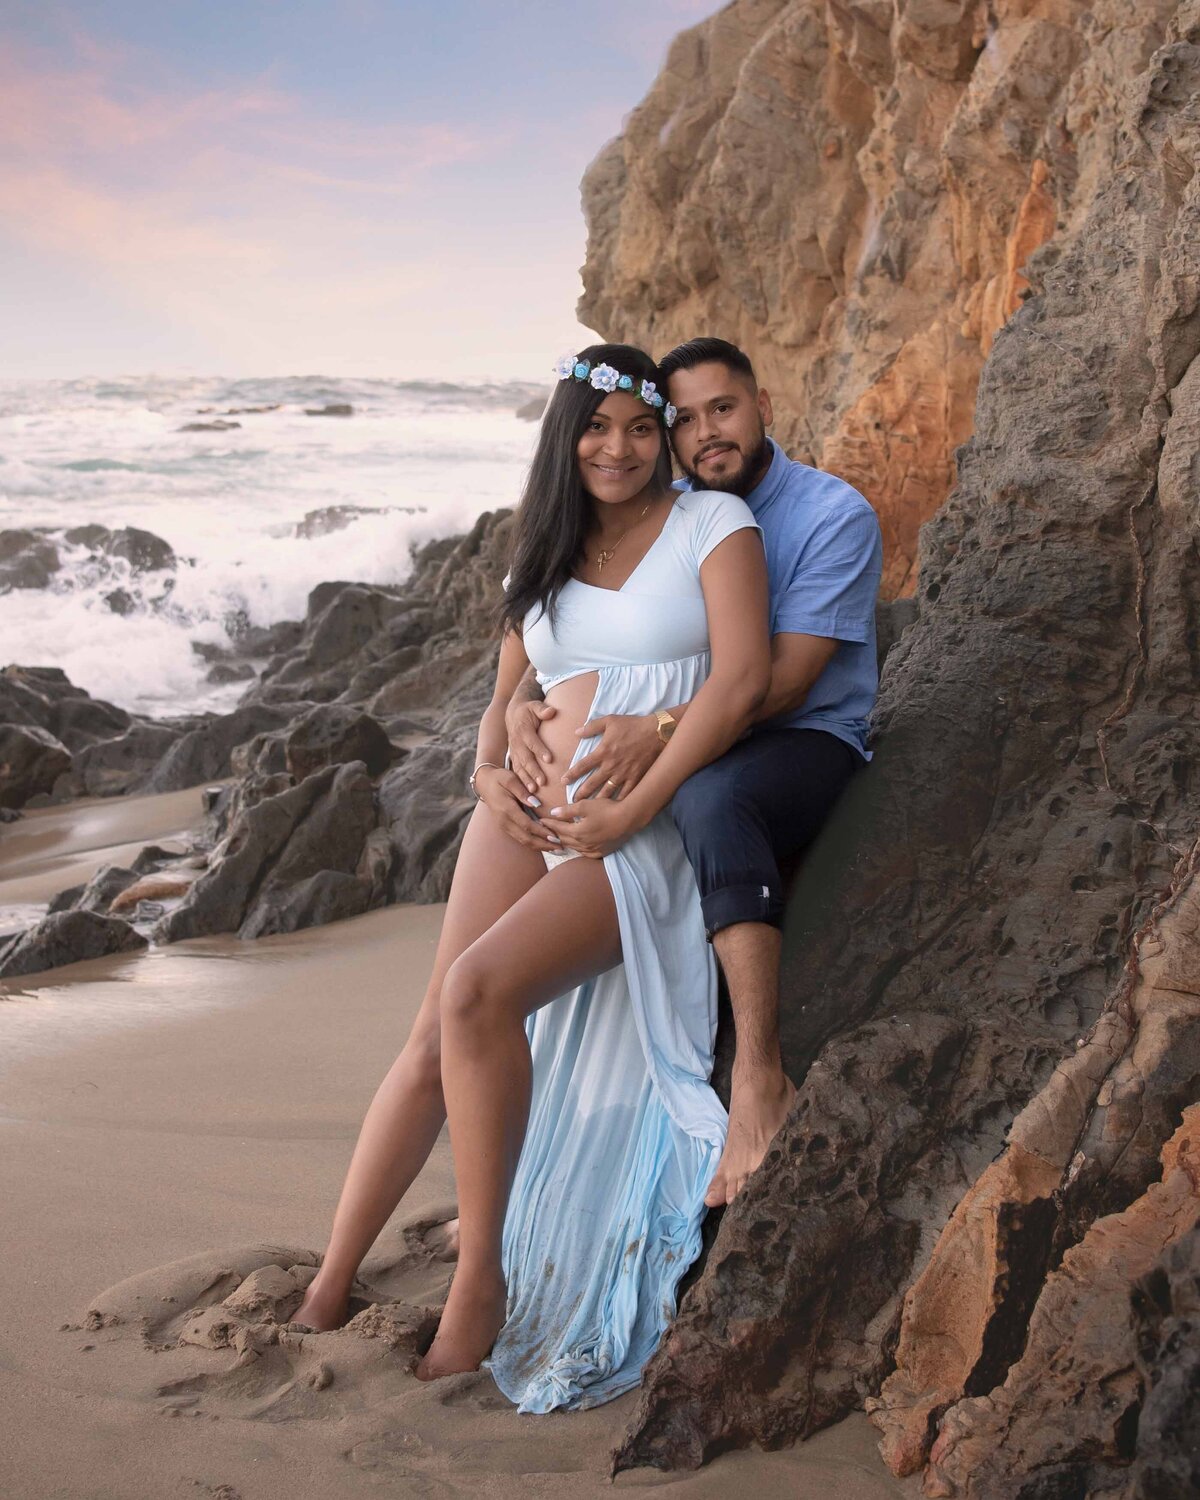 Expectant Mom and Dad on California beach sitting on rocks holding baby bump.